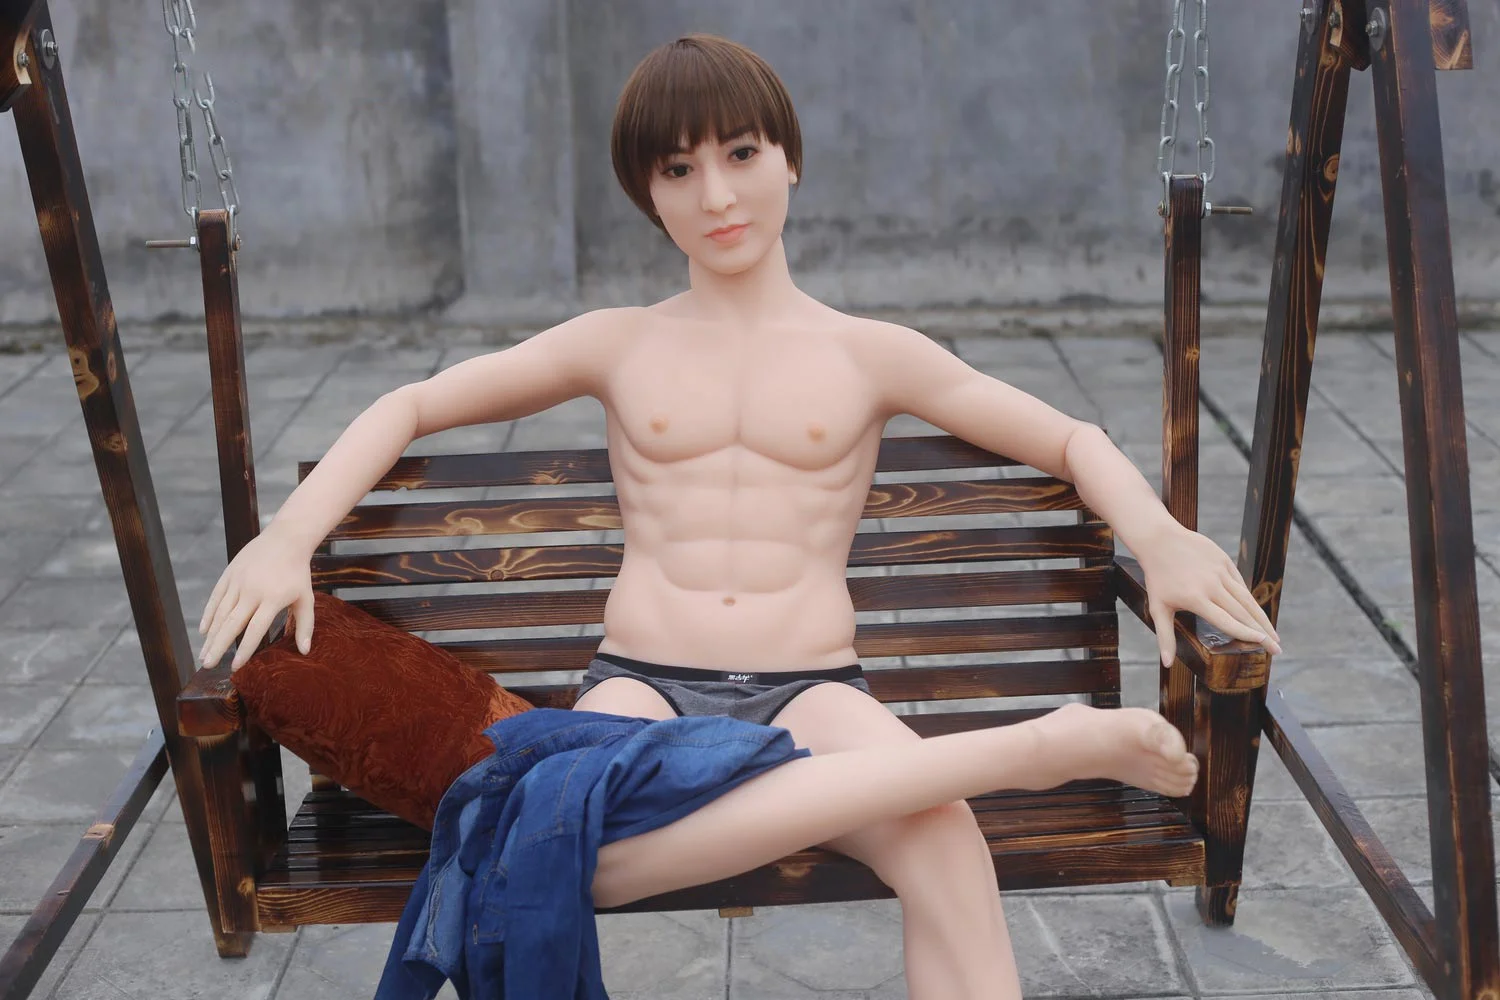 Male Sex Doll With Clothes On Thigh